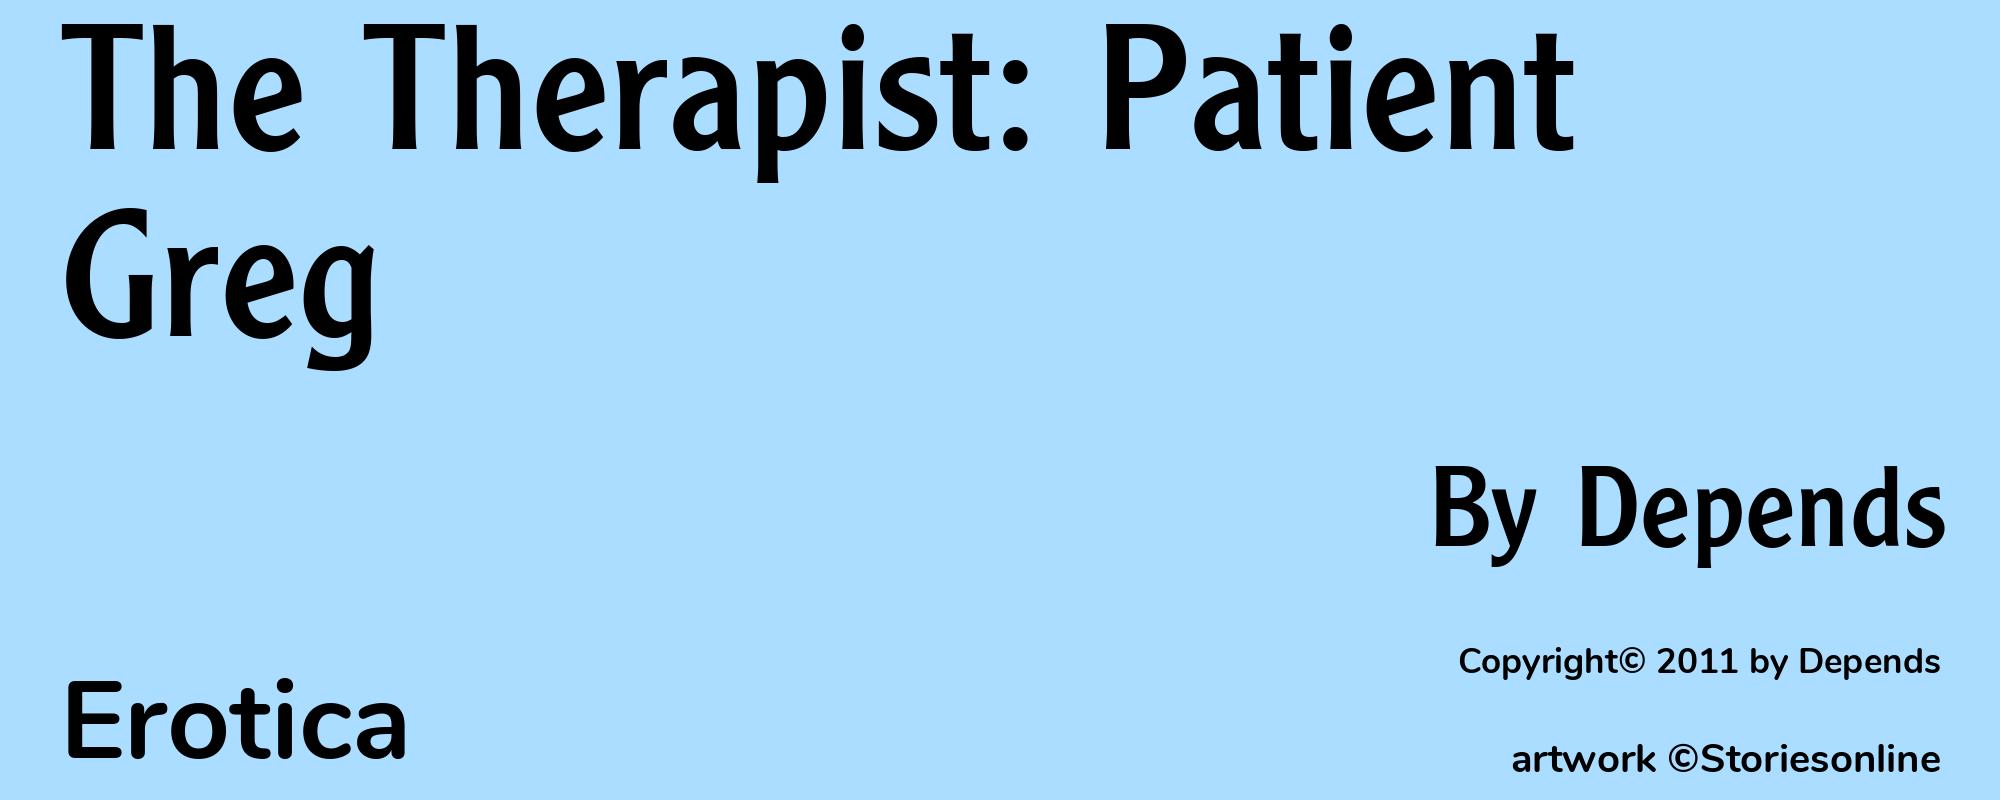 The Therapist: Patient Greg - Cover